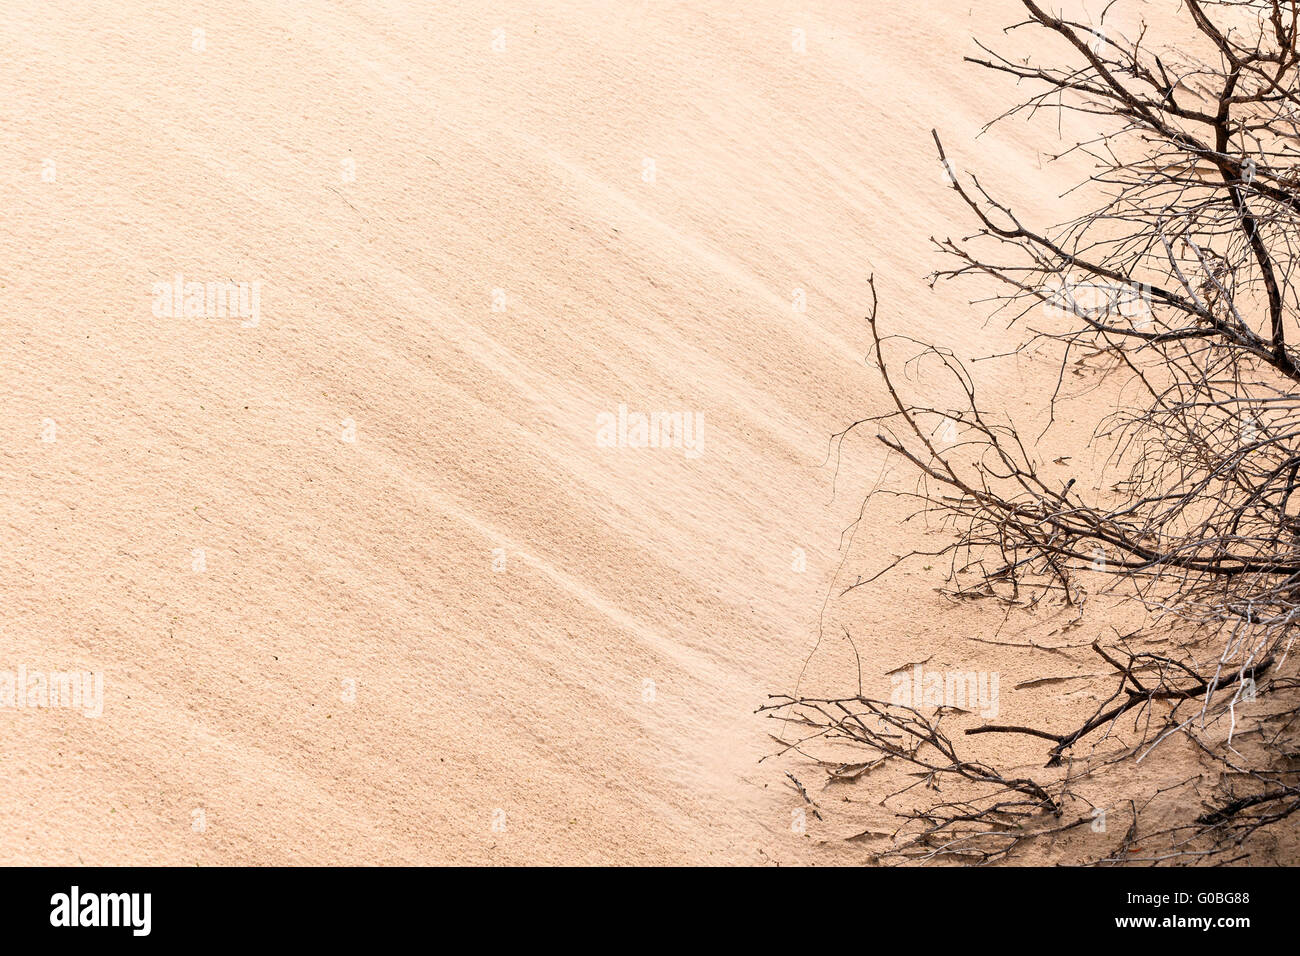 desert - close-up picture of a sanddune with dried Stock Photo